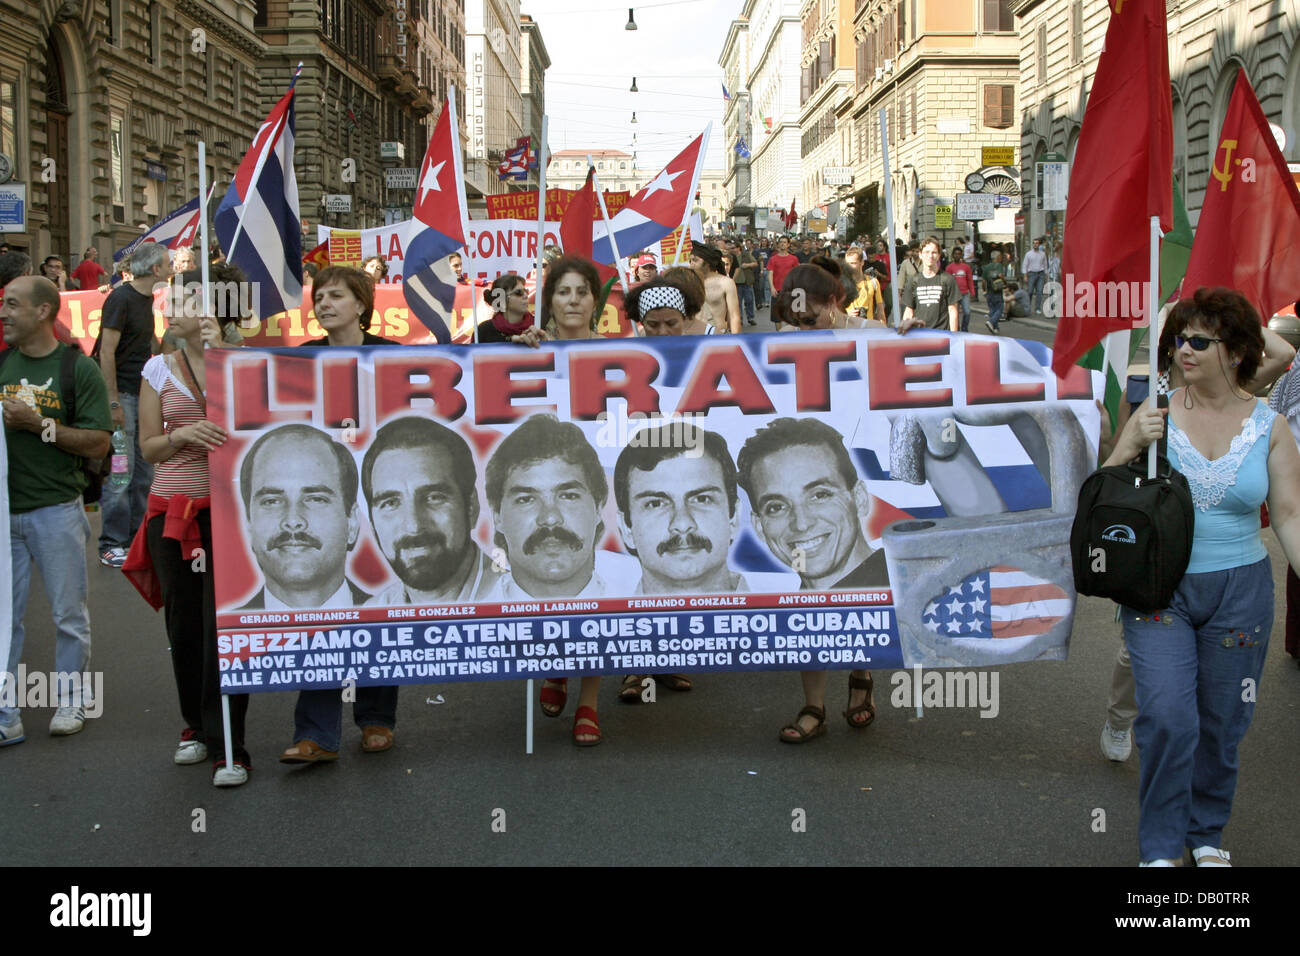 Numerous demonstrators call for the release of Cubans Gerardo Hernandez, Rene Gonzales, Ramon Labanino, Fernando Gonzales and Antonio Guerrero in Rome, Italy, 09 June 2007. 10 thousands protested against the visit of US-American president George W. Bush. Photo: Lars Halbauer Stock Photo